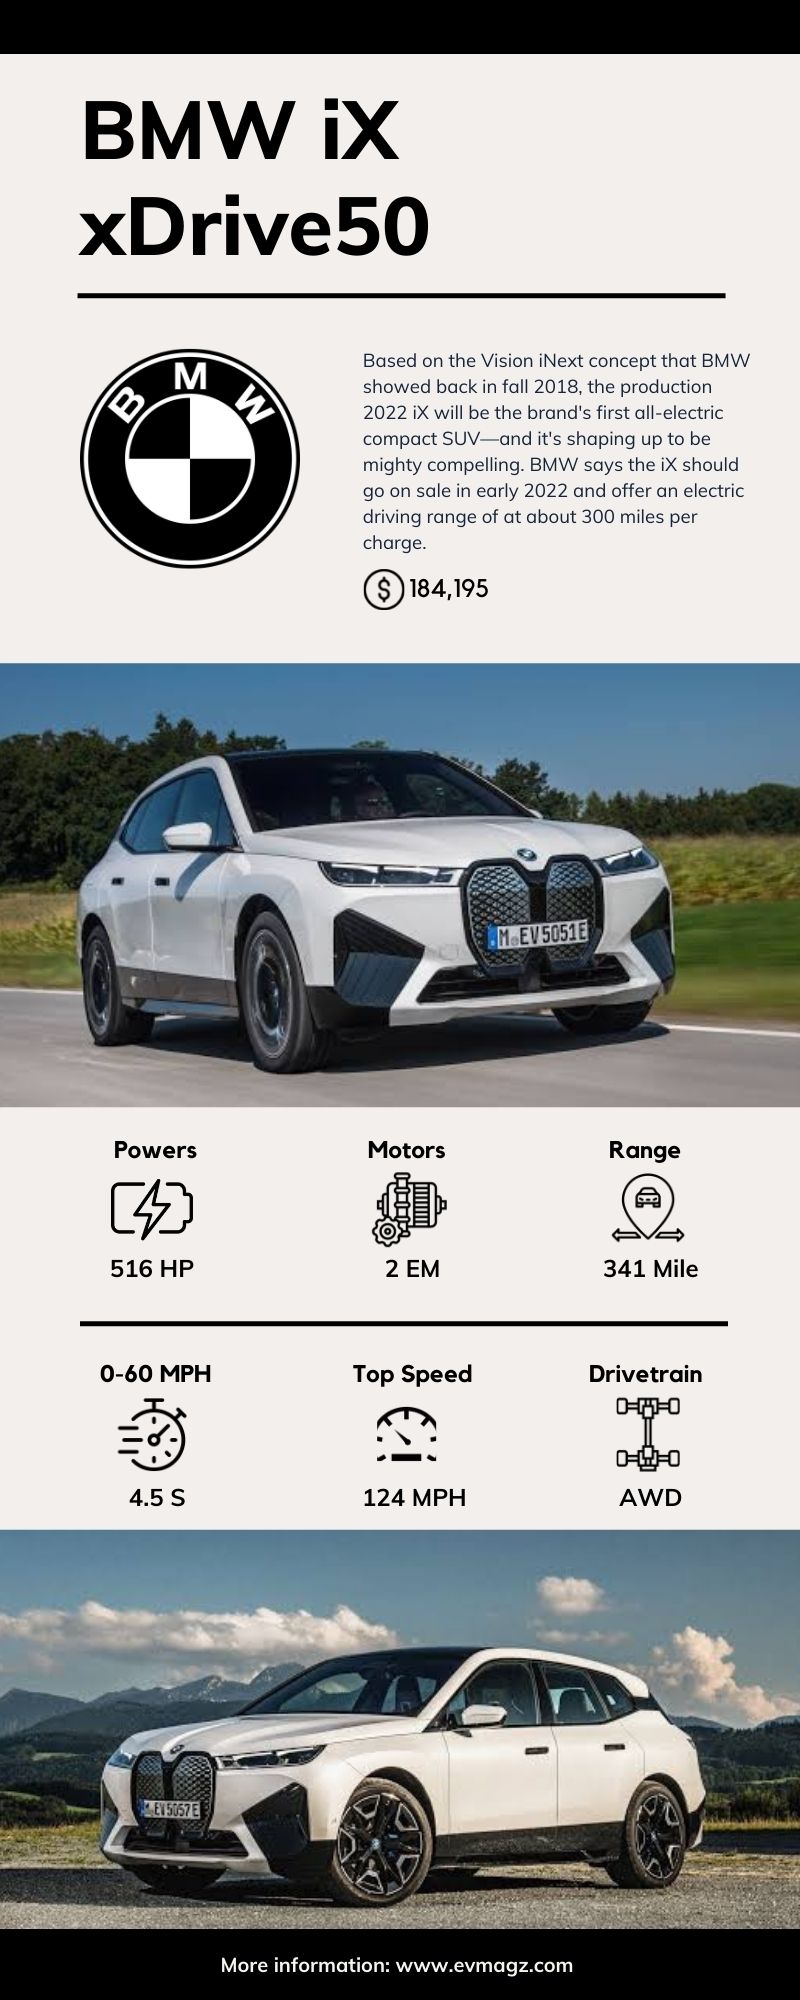 BMW iX xDrive50 Specifications Infographic